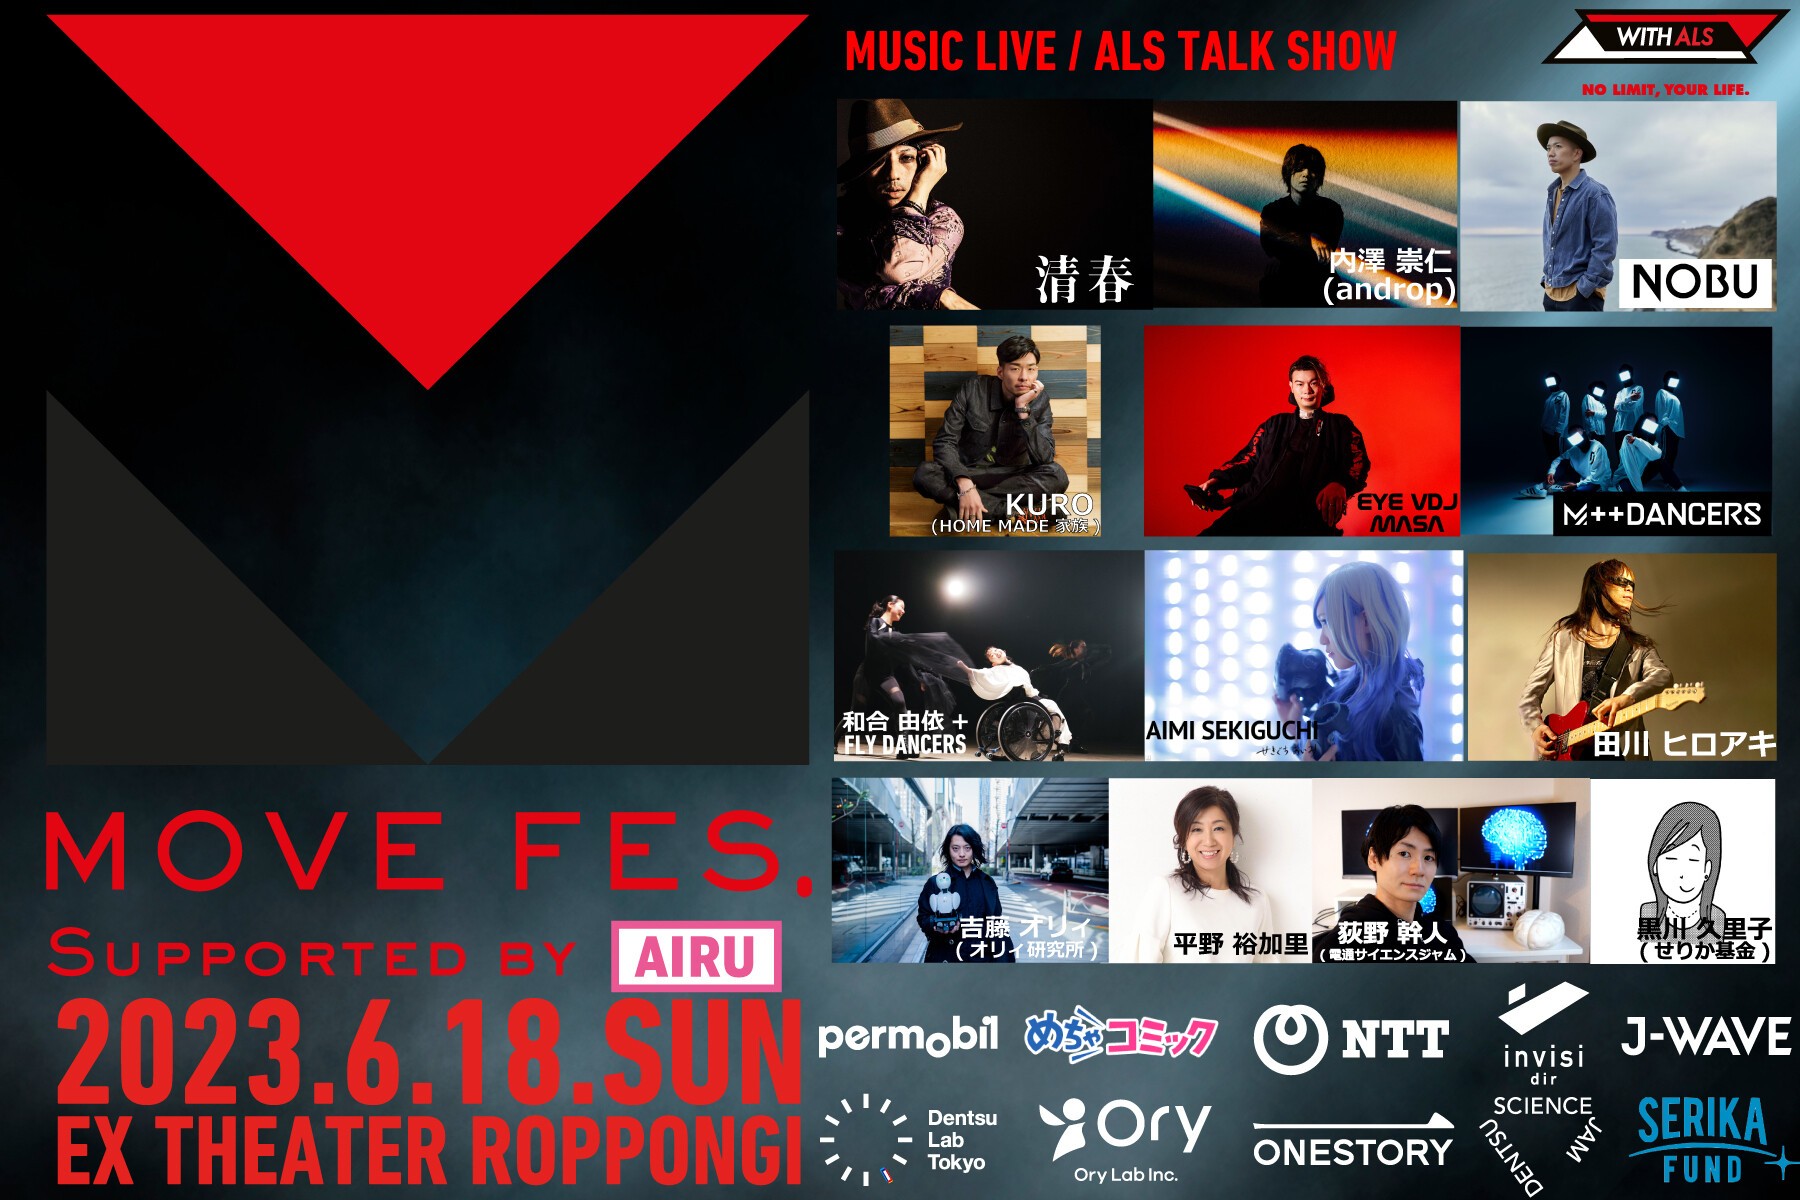 MOVE FES.2023 Supported by AIRU | Zaiko